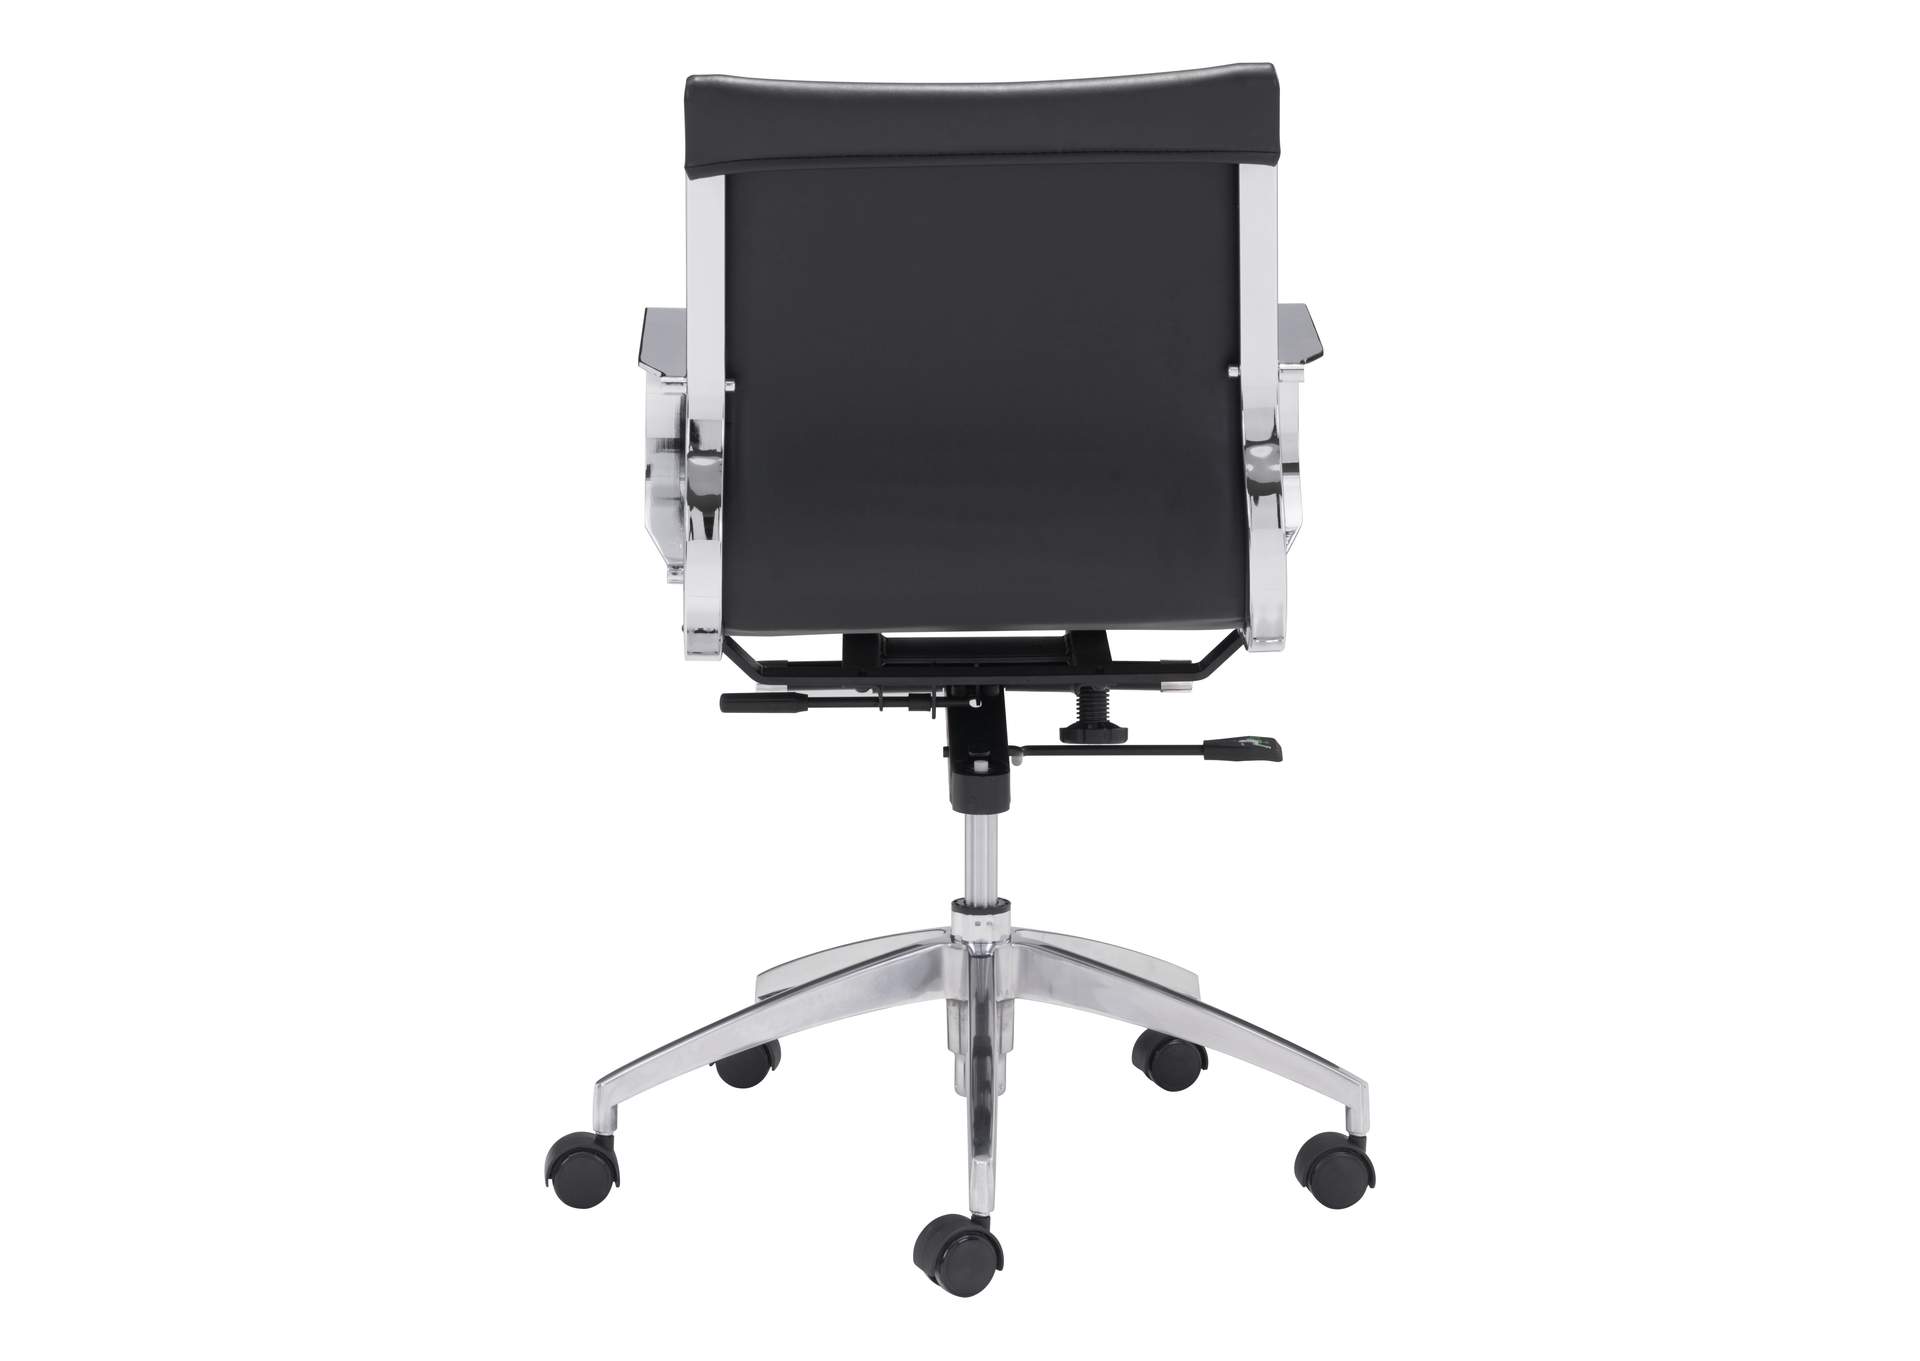 Glider Low Back Office Chair Black,Zuo